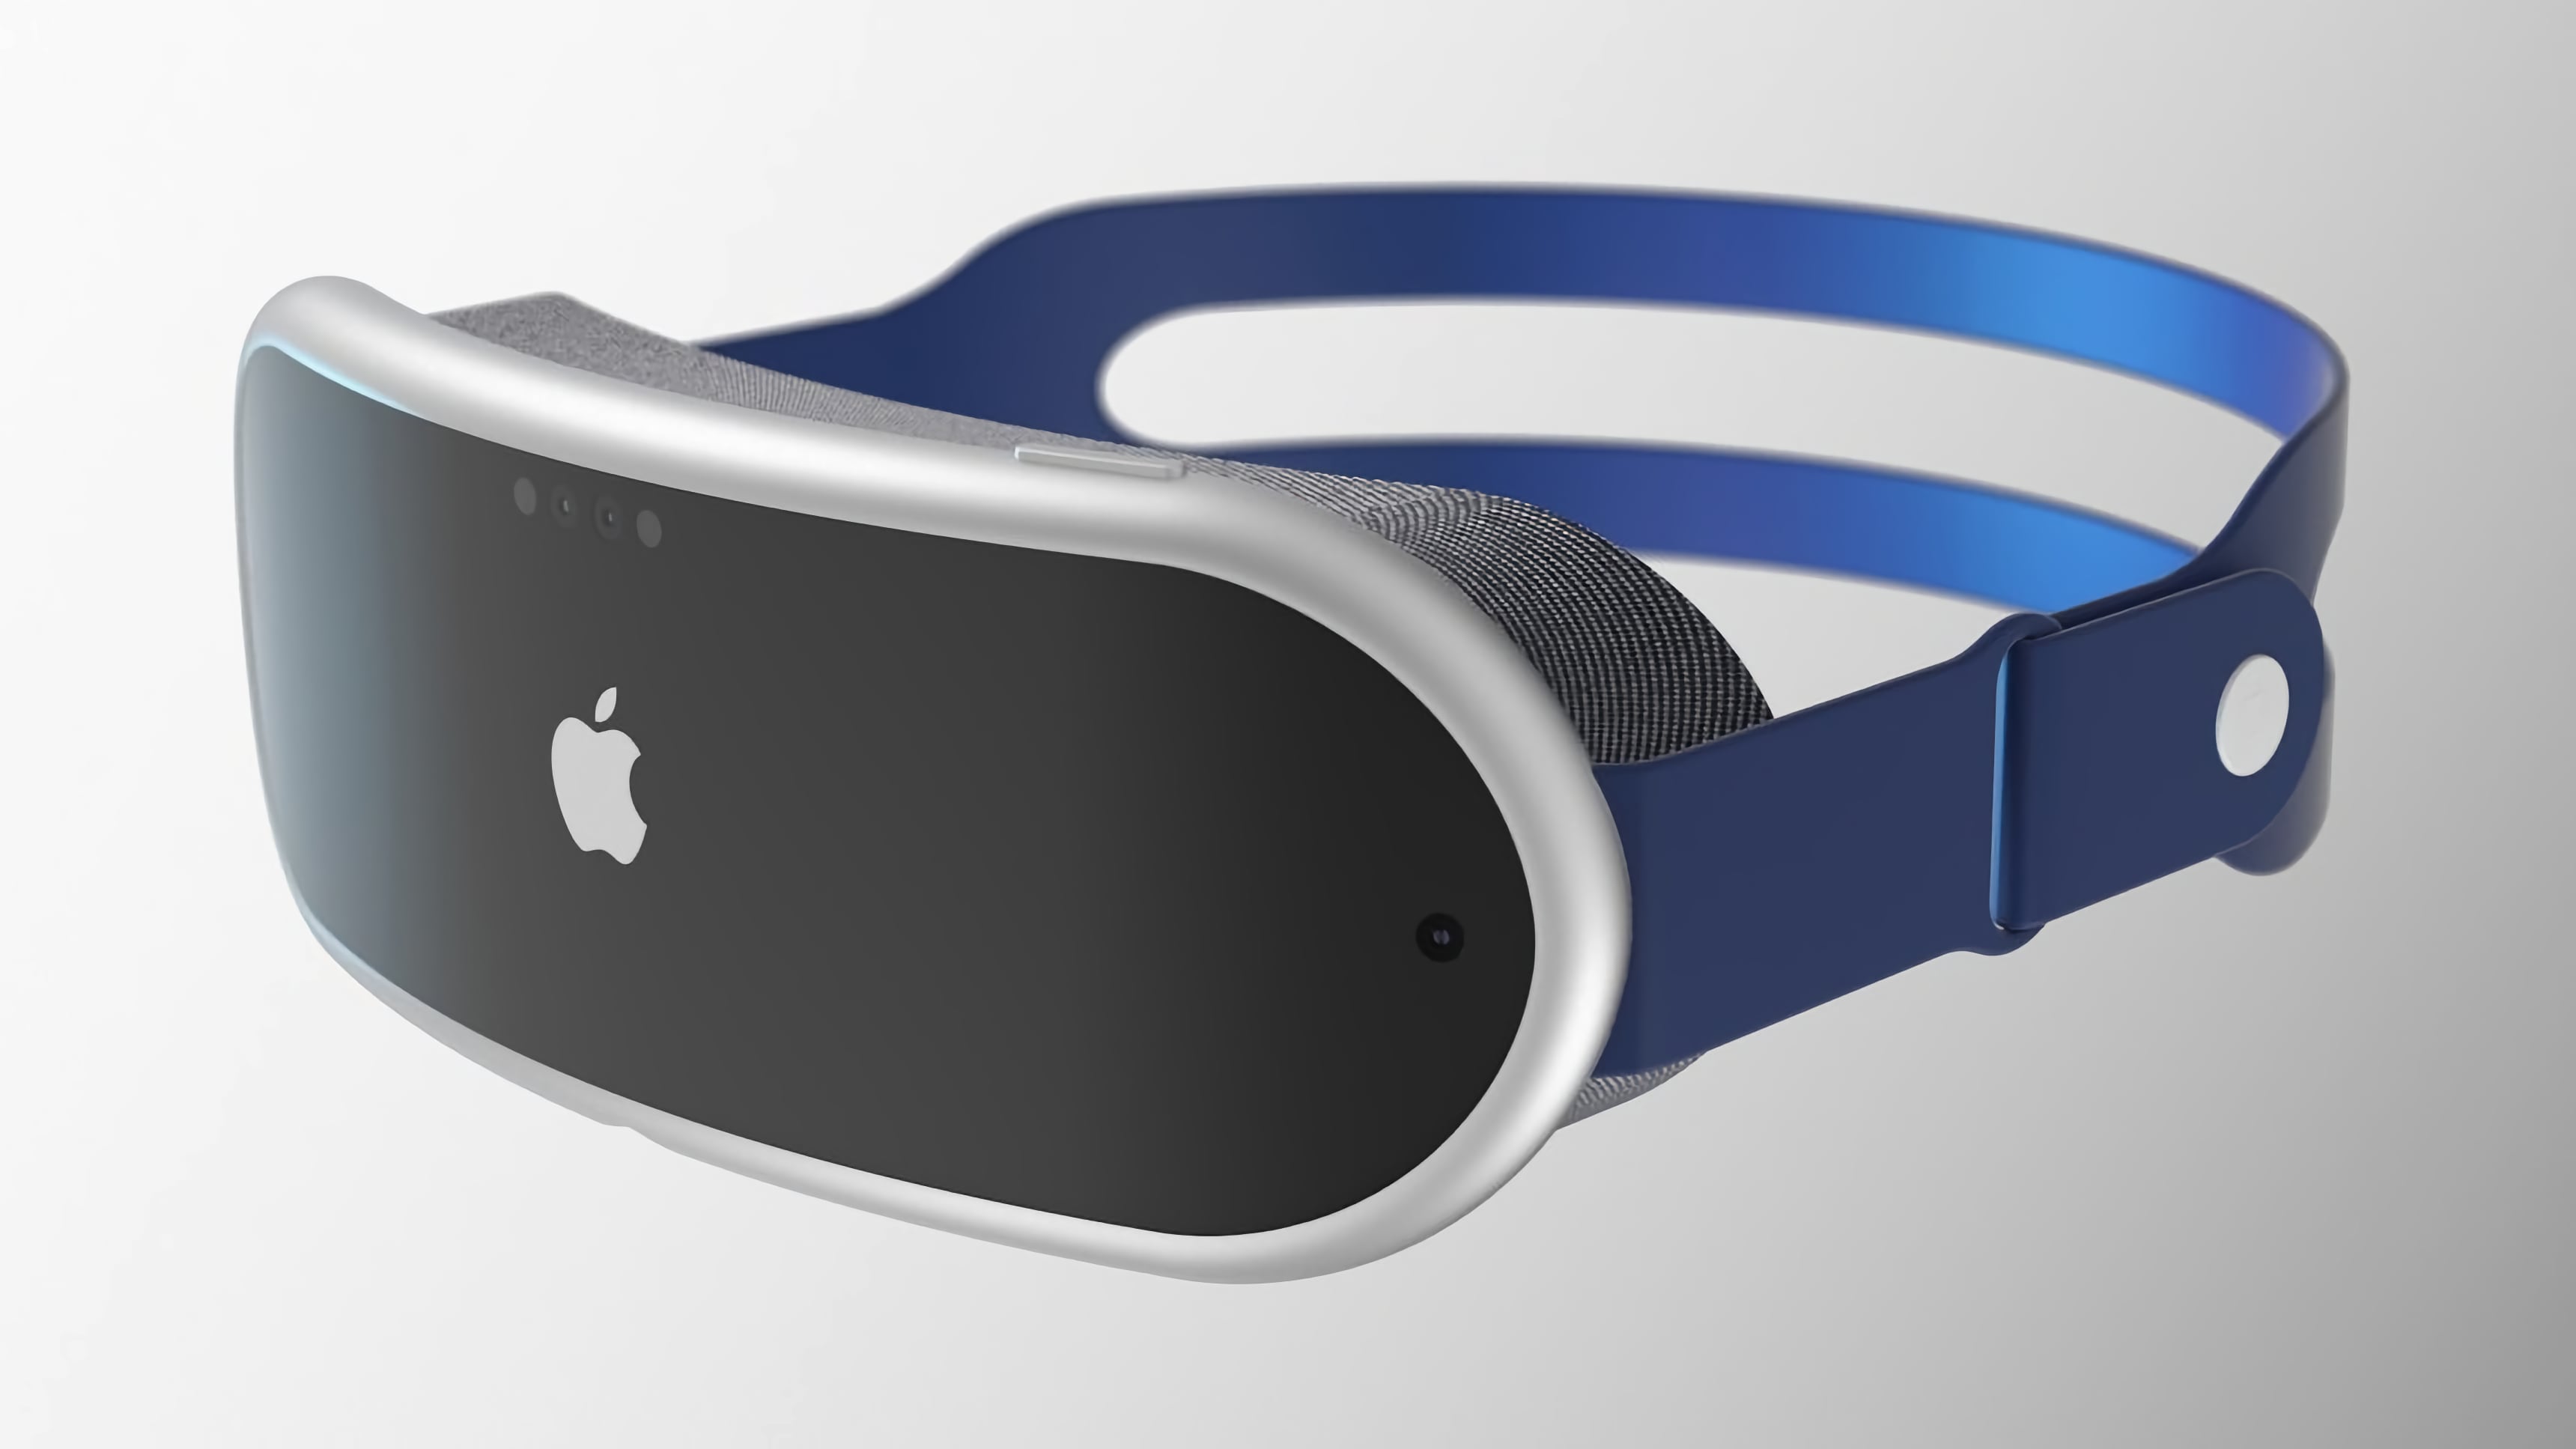 Apple's AR/VR headset is nearly here